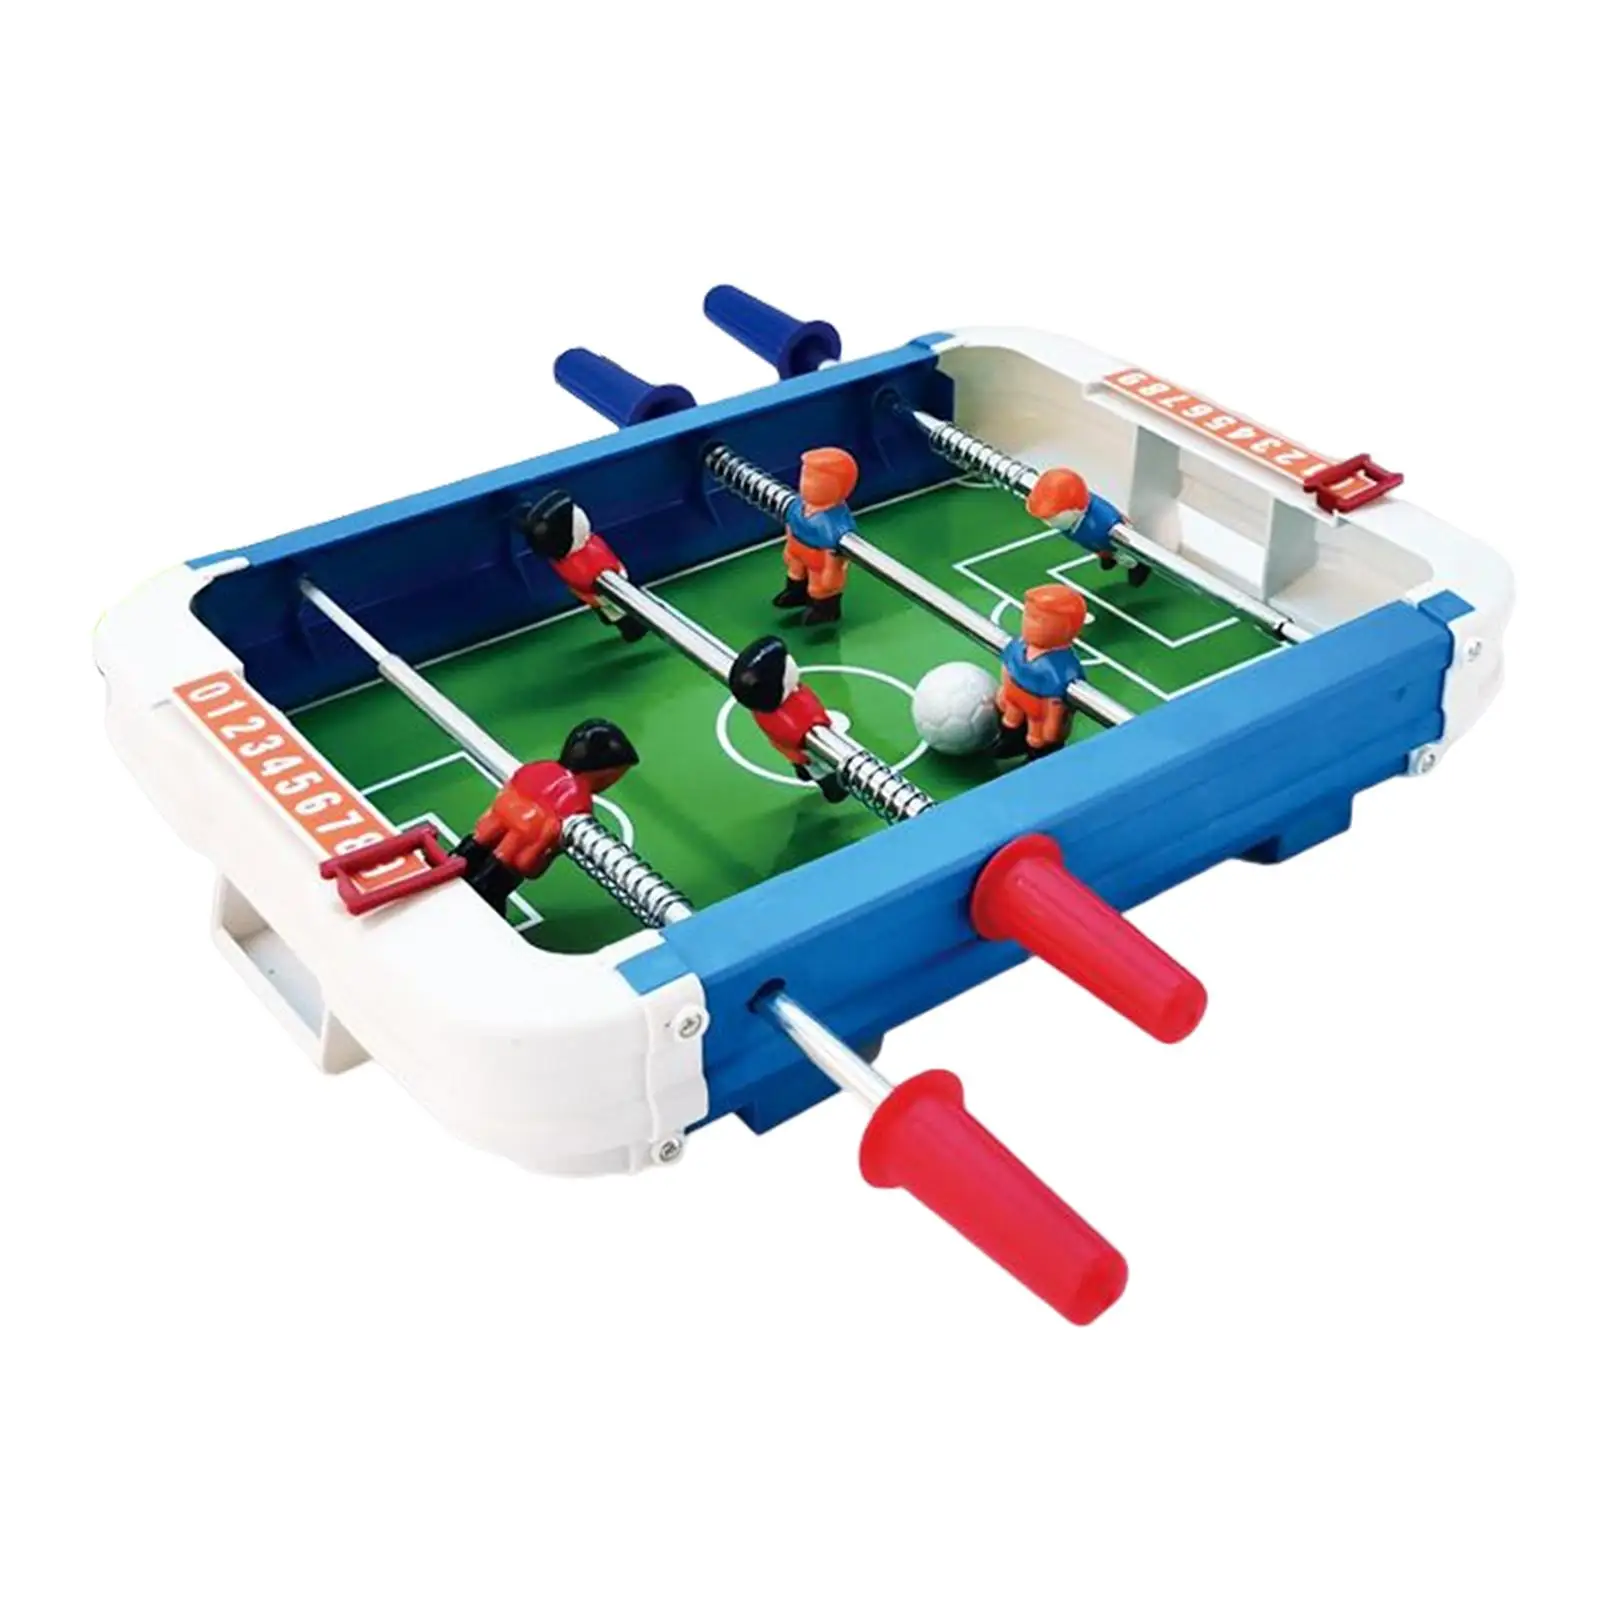 Foosball Table Tabletop Football Game Table Top Soccer Game for Game Rooms